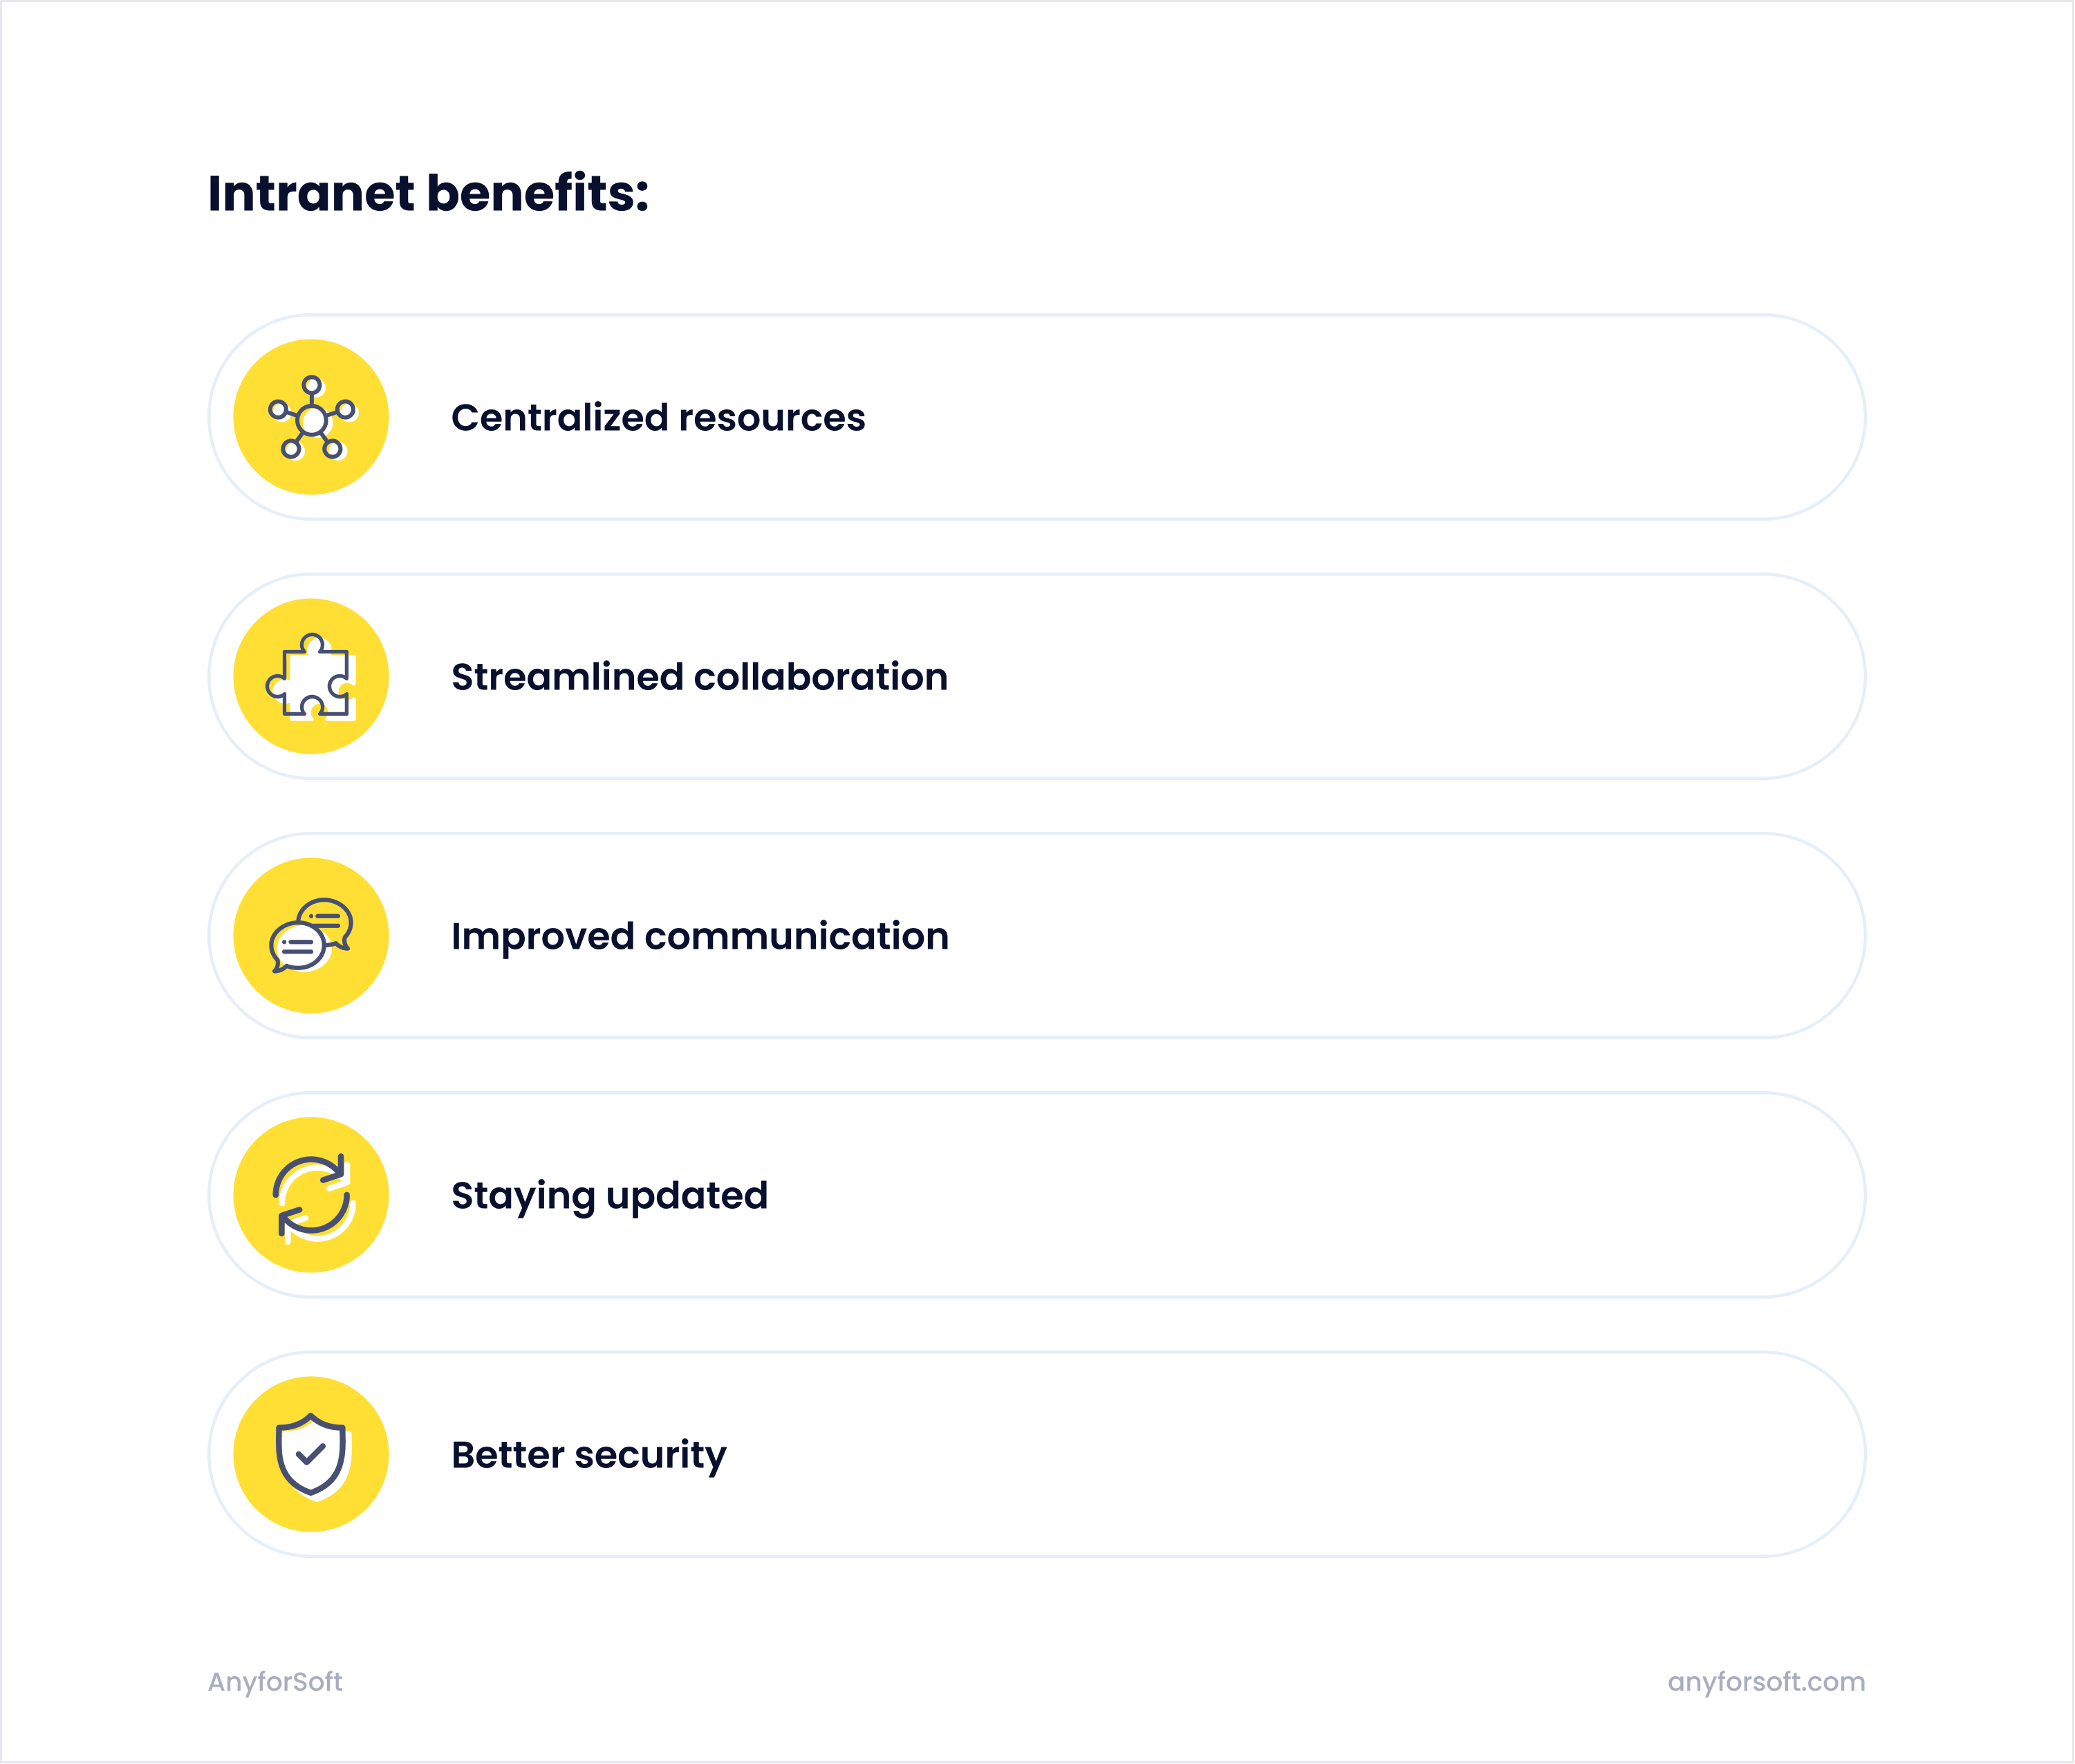 intranet benefits for organizations